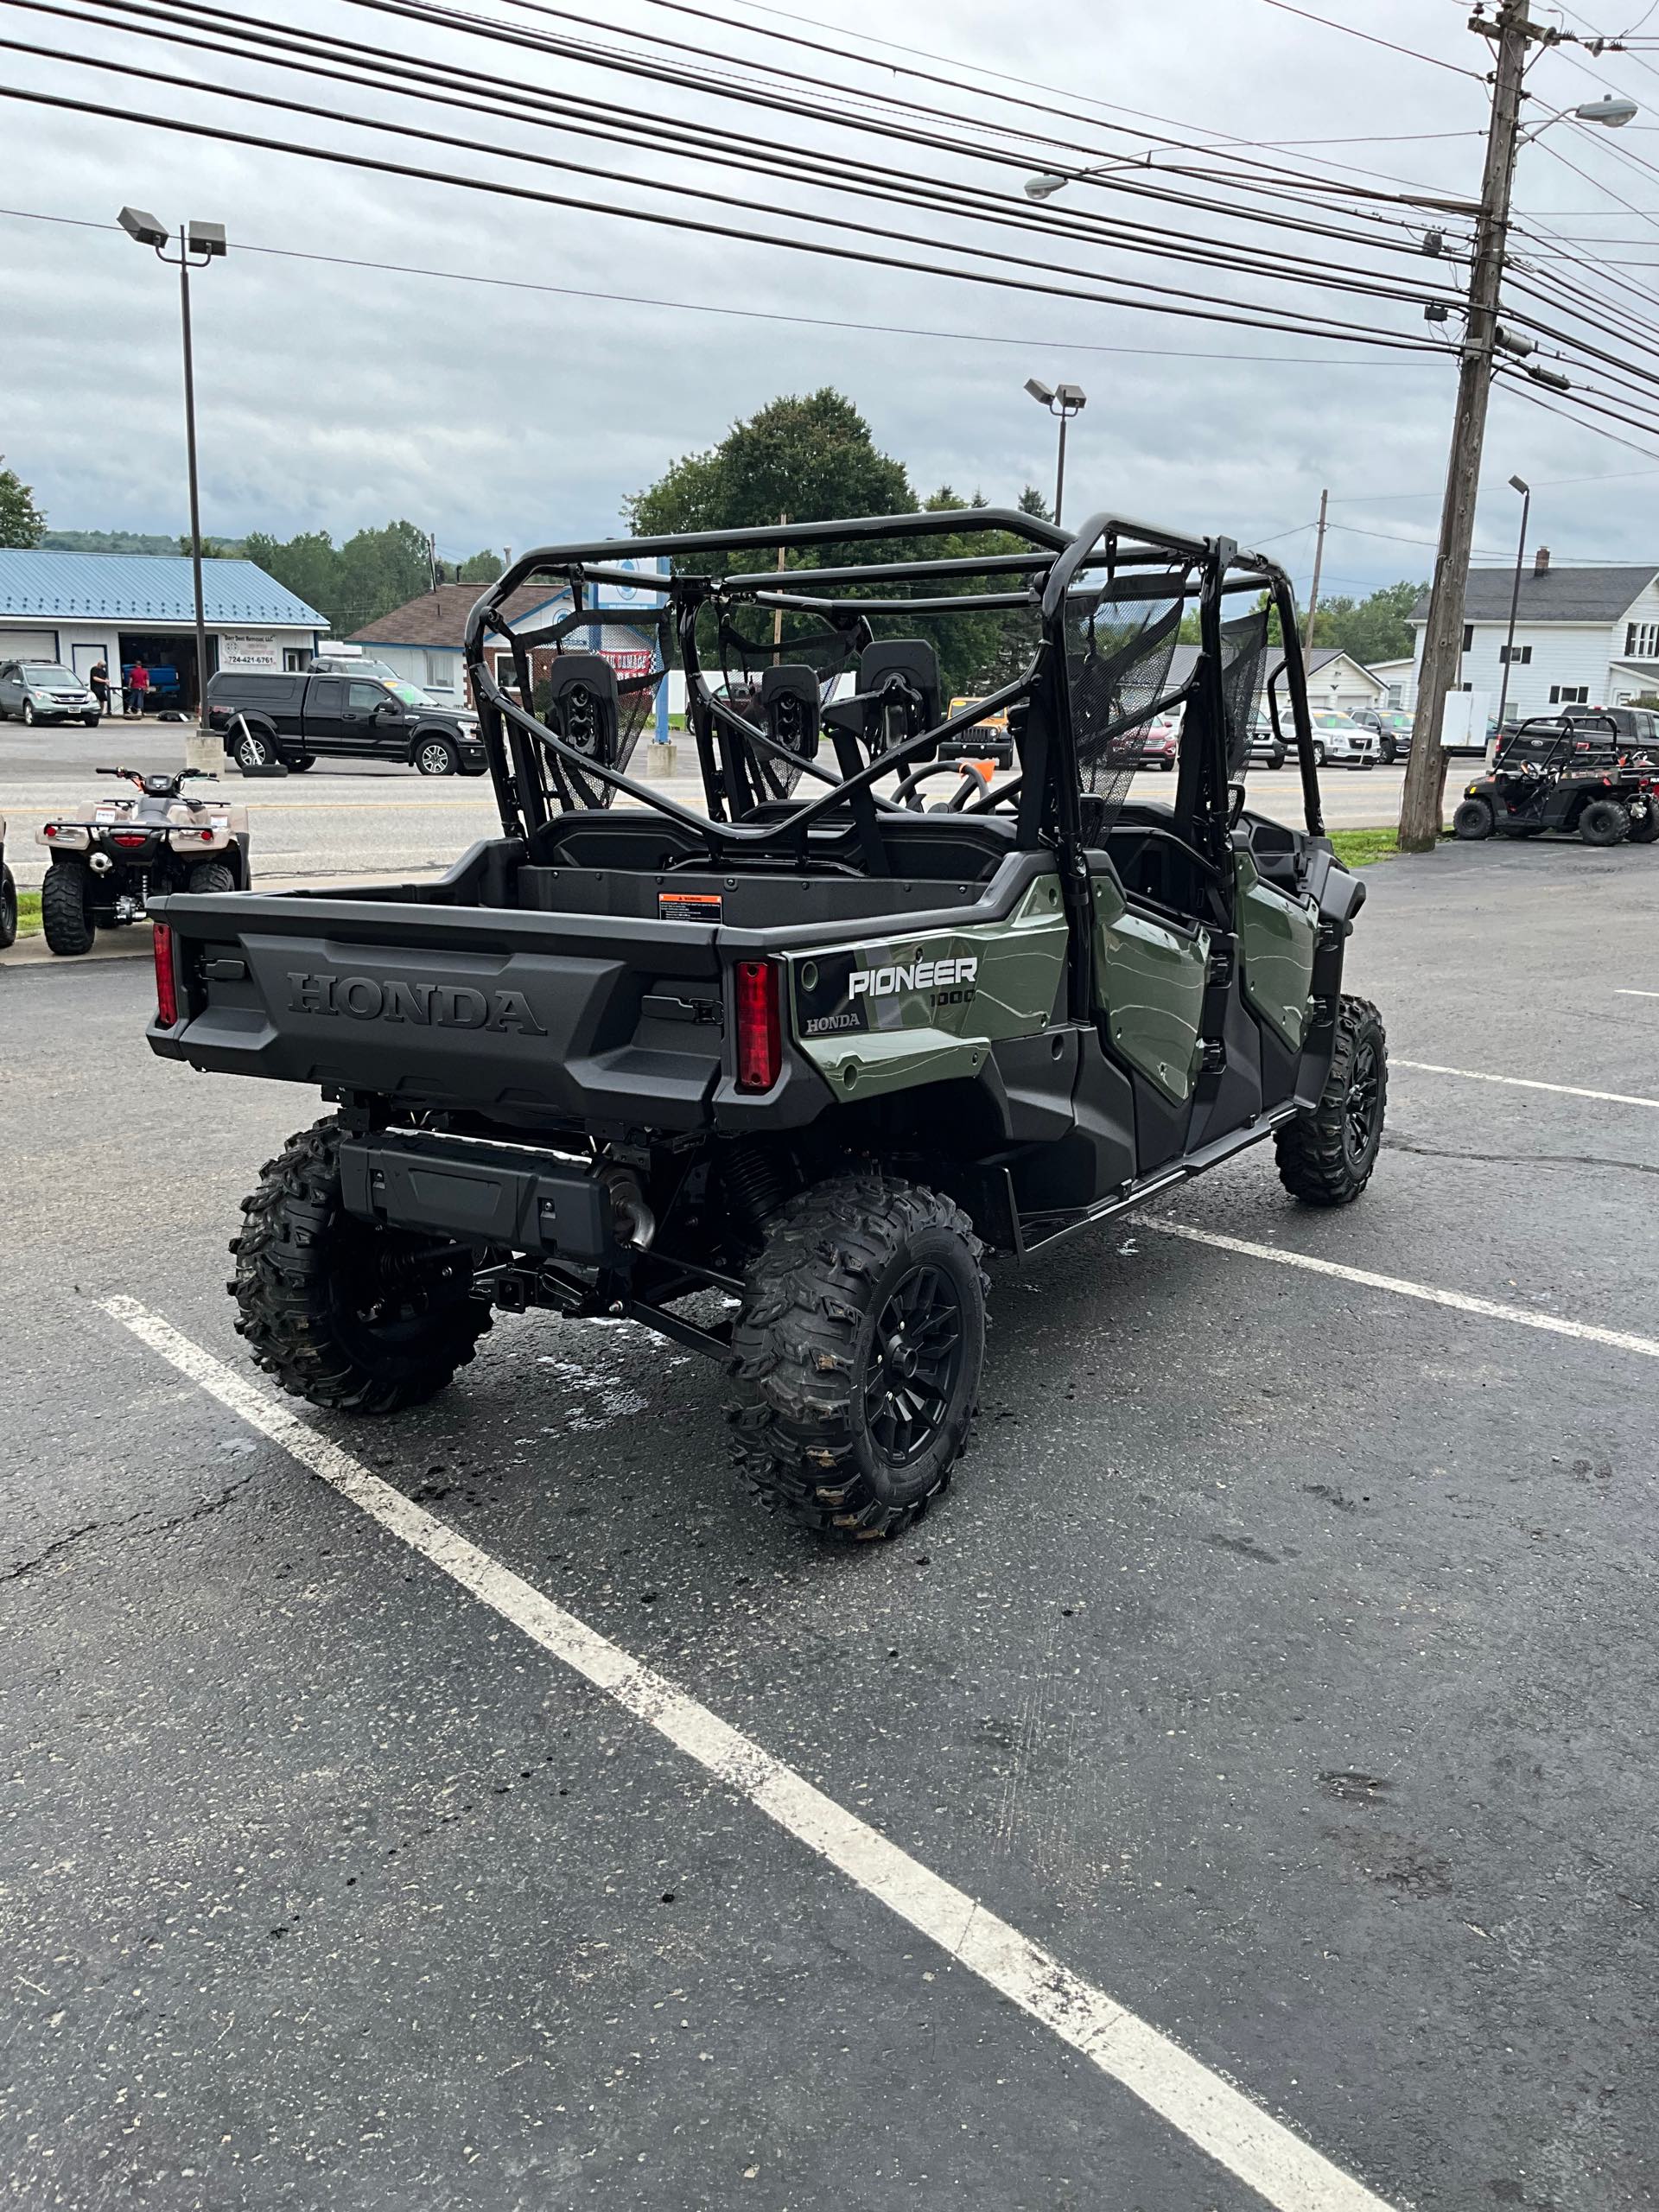 2023 Honda Pioneer 1000-6 Crew Deluxe at Leisure Time Powersports of Corry